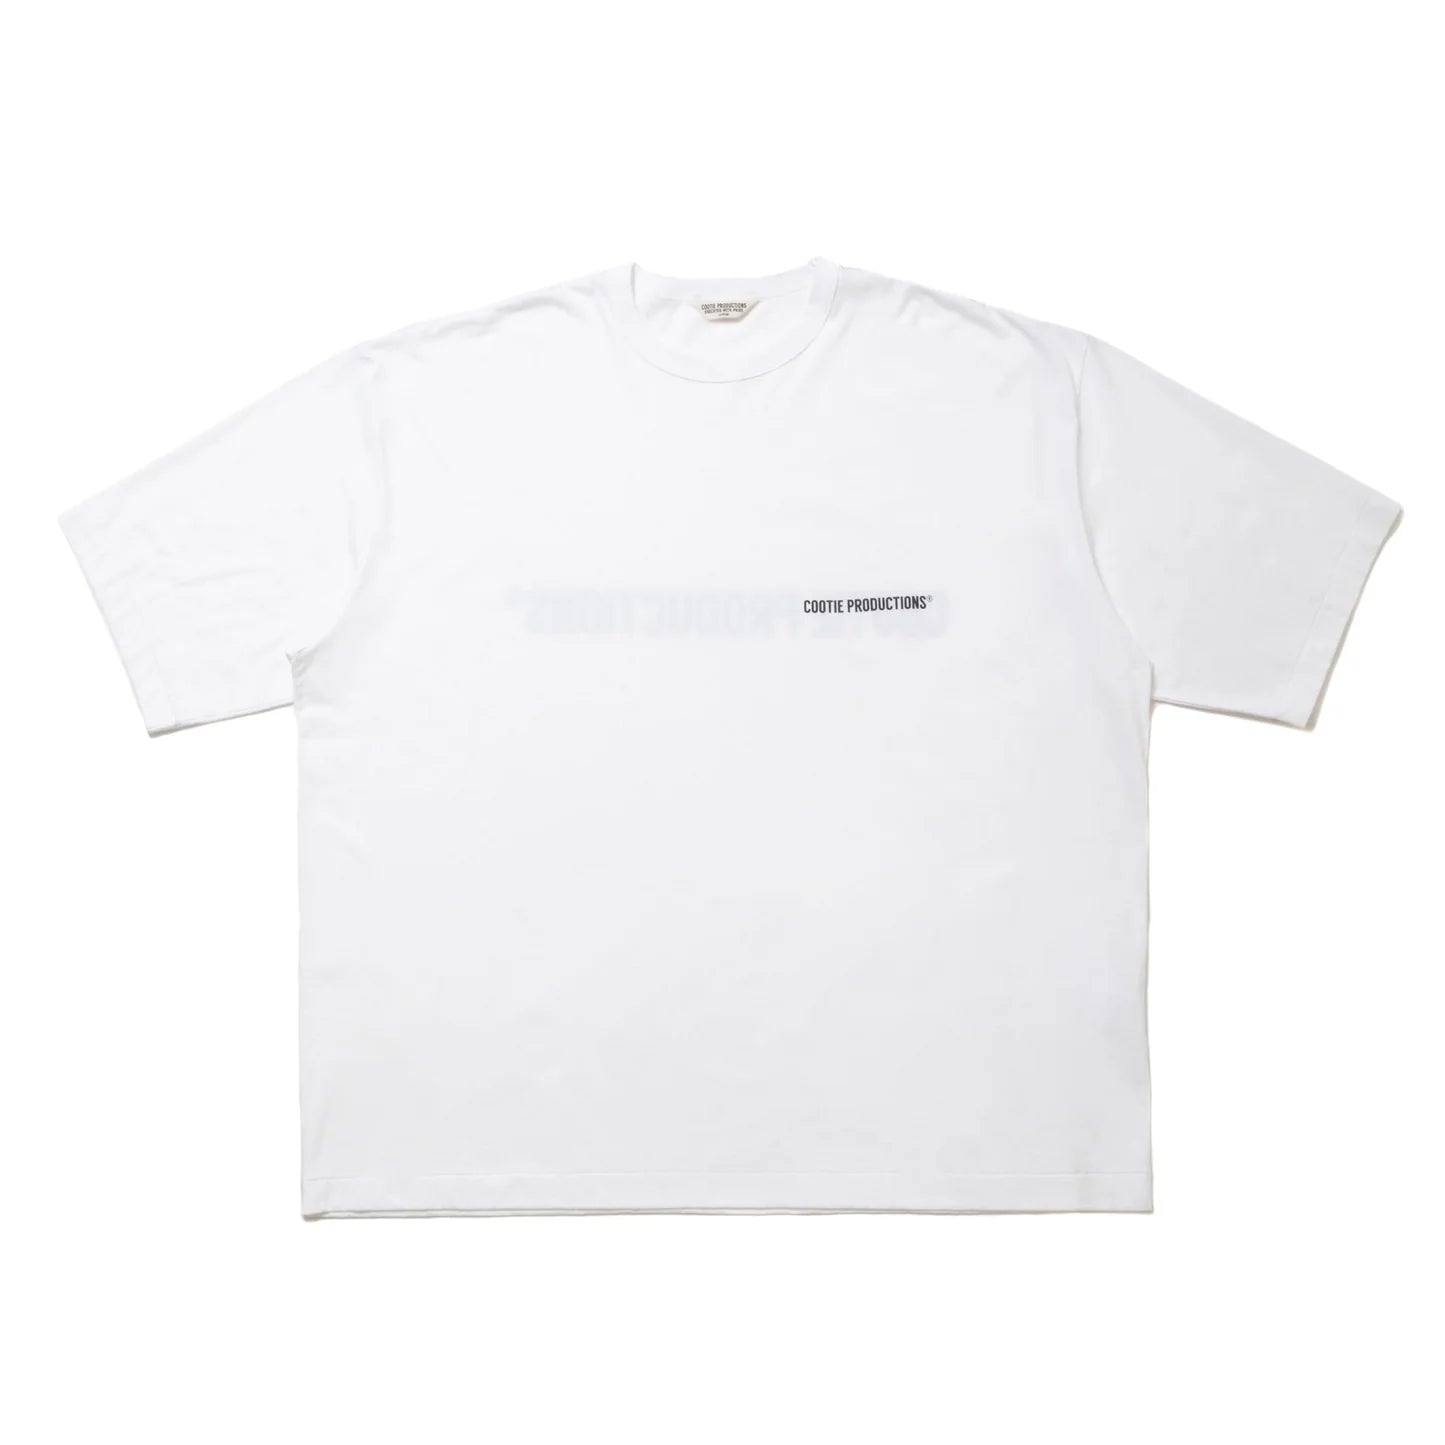 COOTIE PRODUCTIONS PRINT OVERSIZED S/S TEE